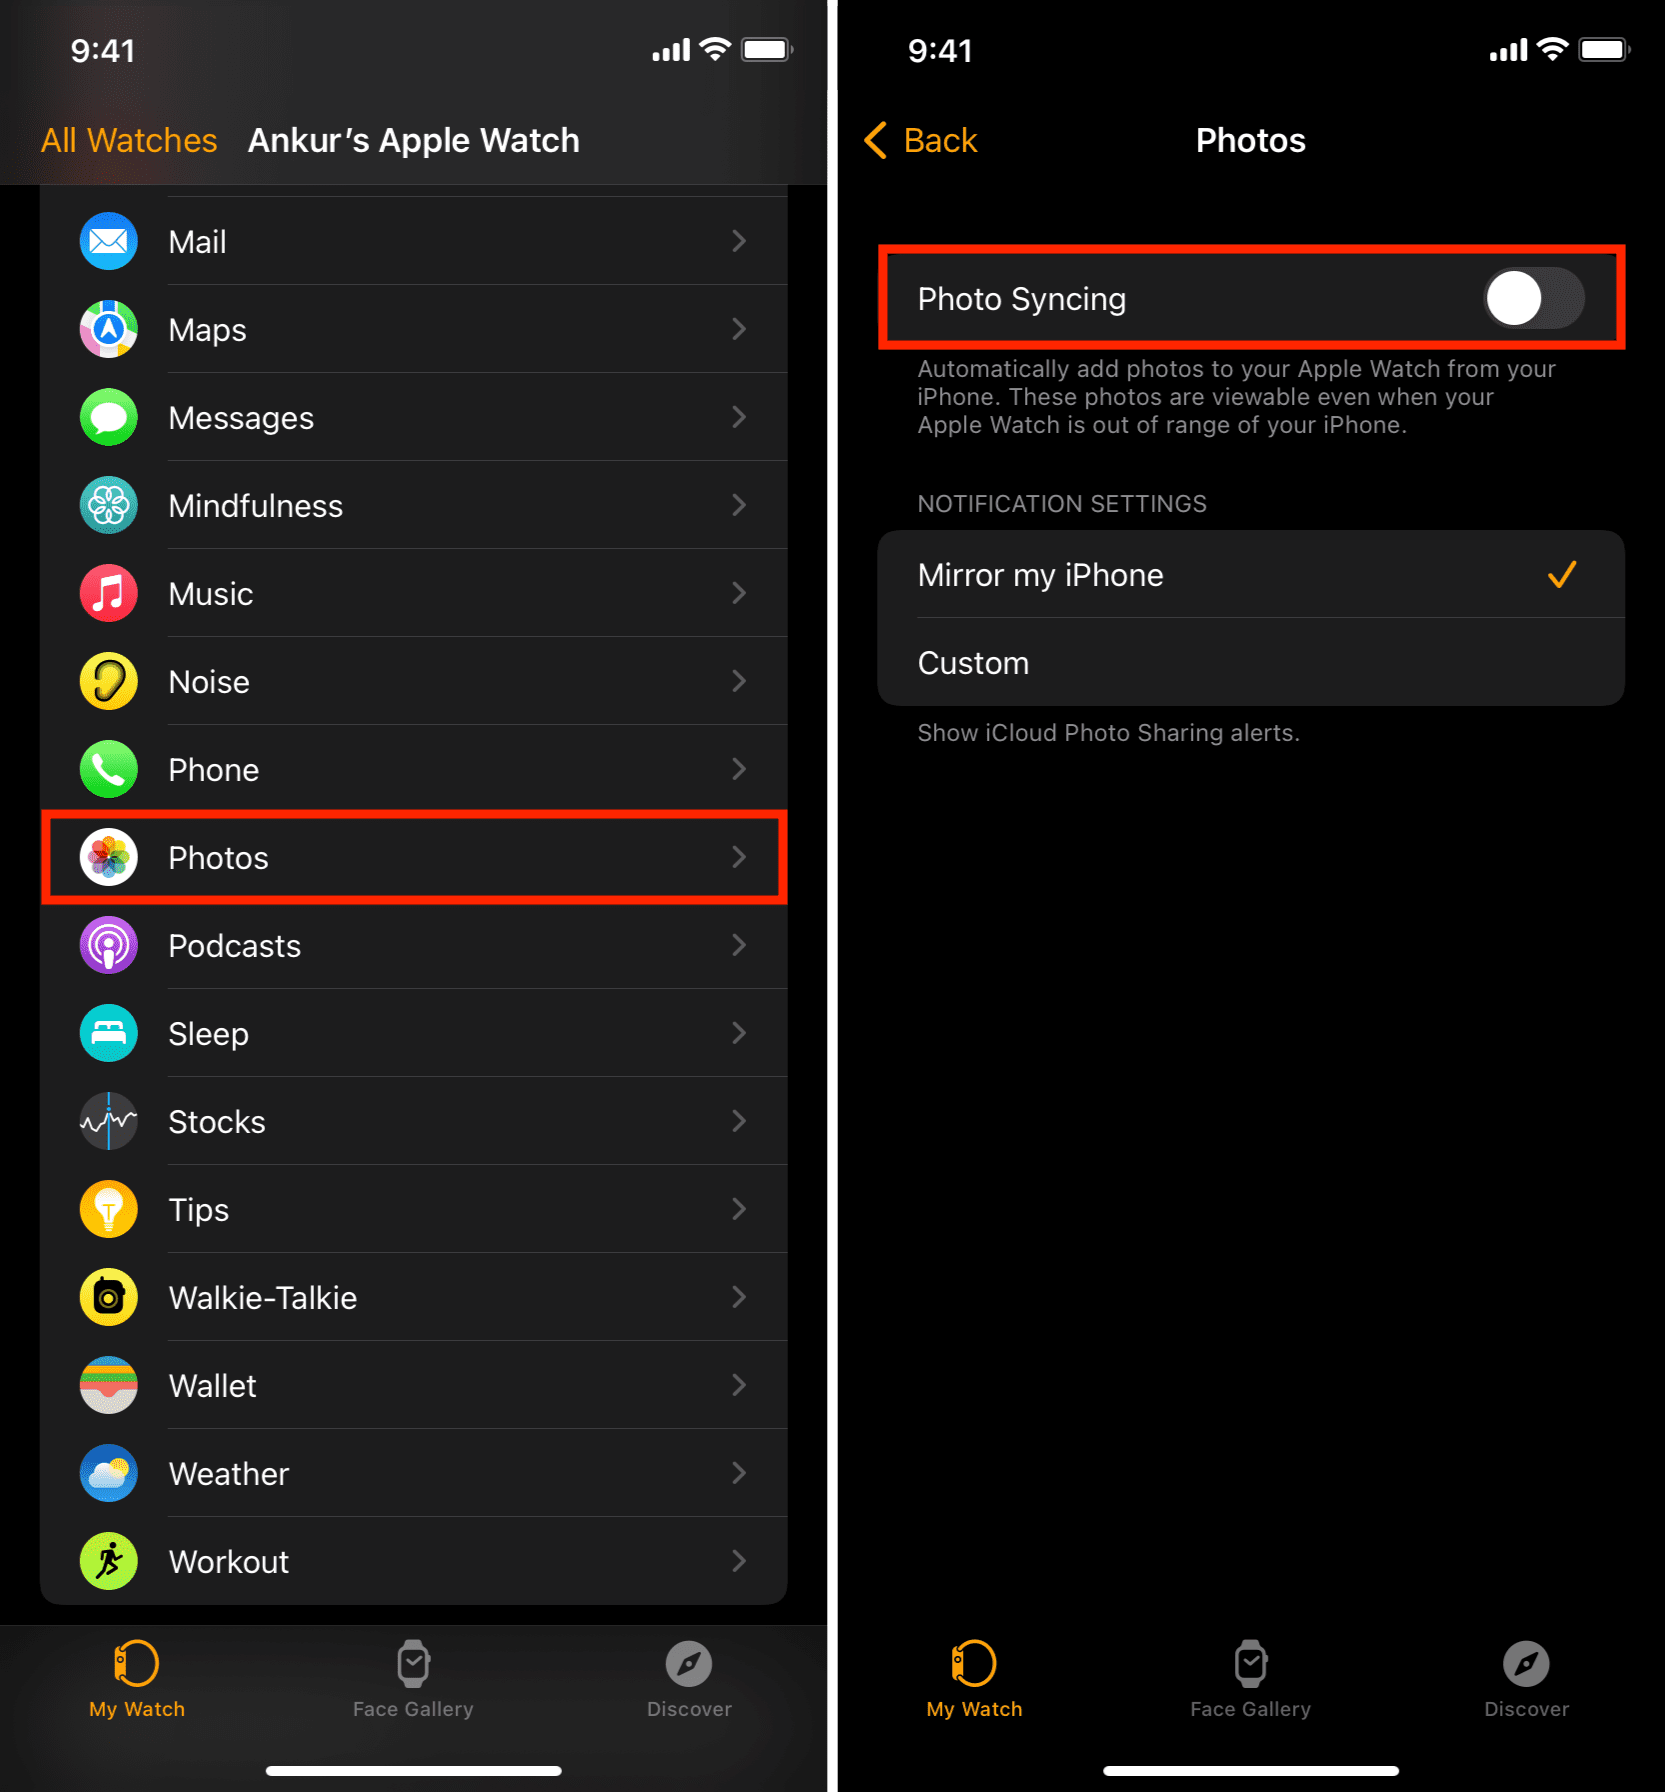 Turn off Photo Syncing on Apple Watch